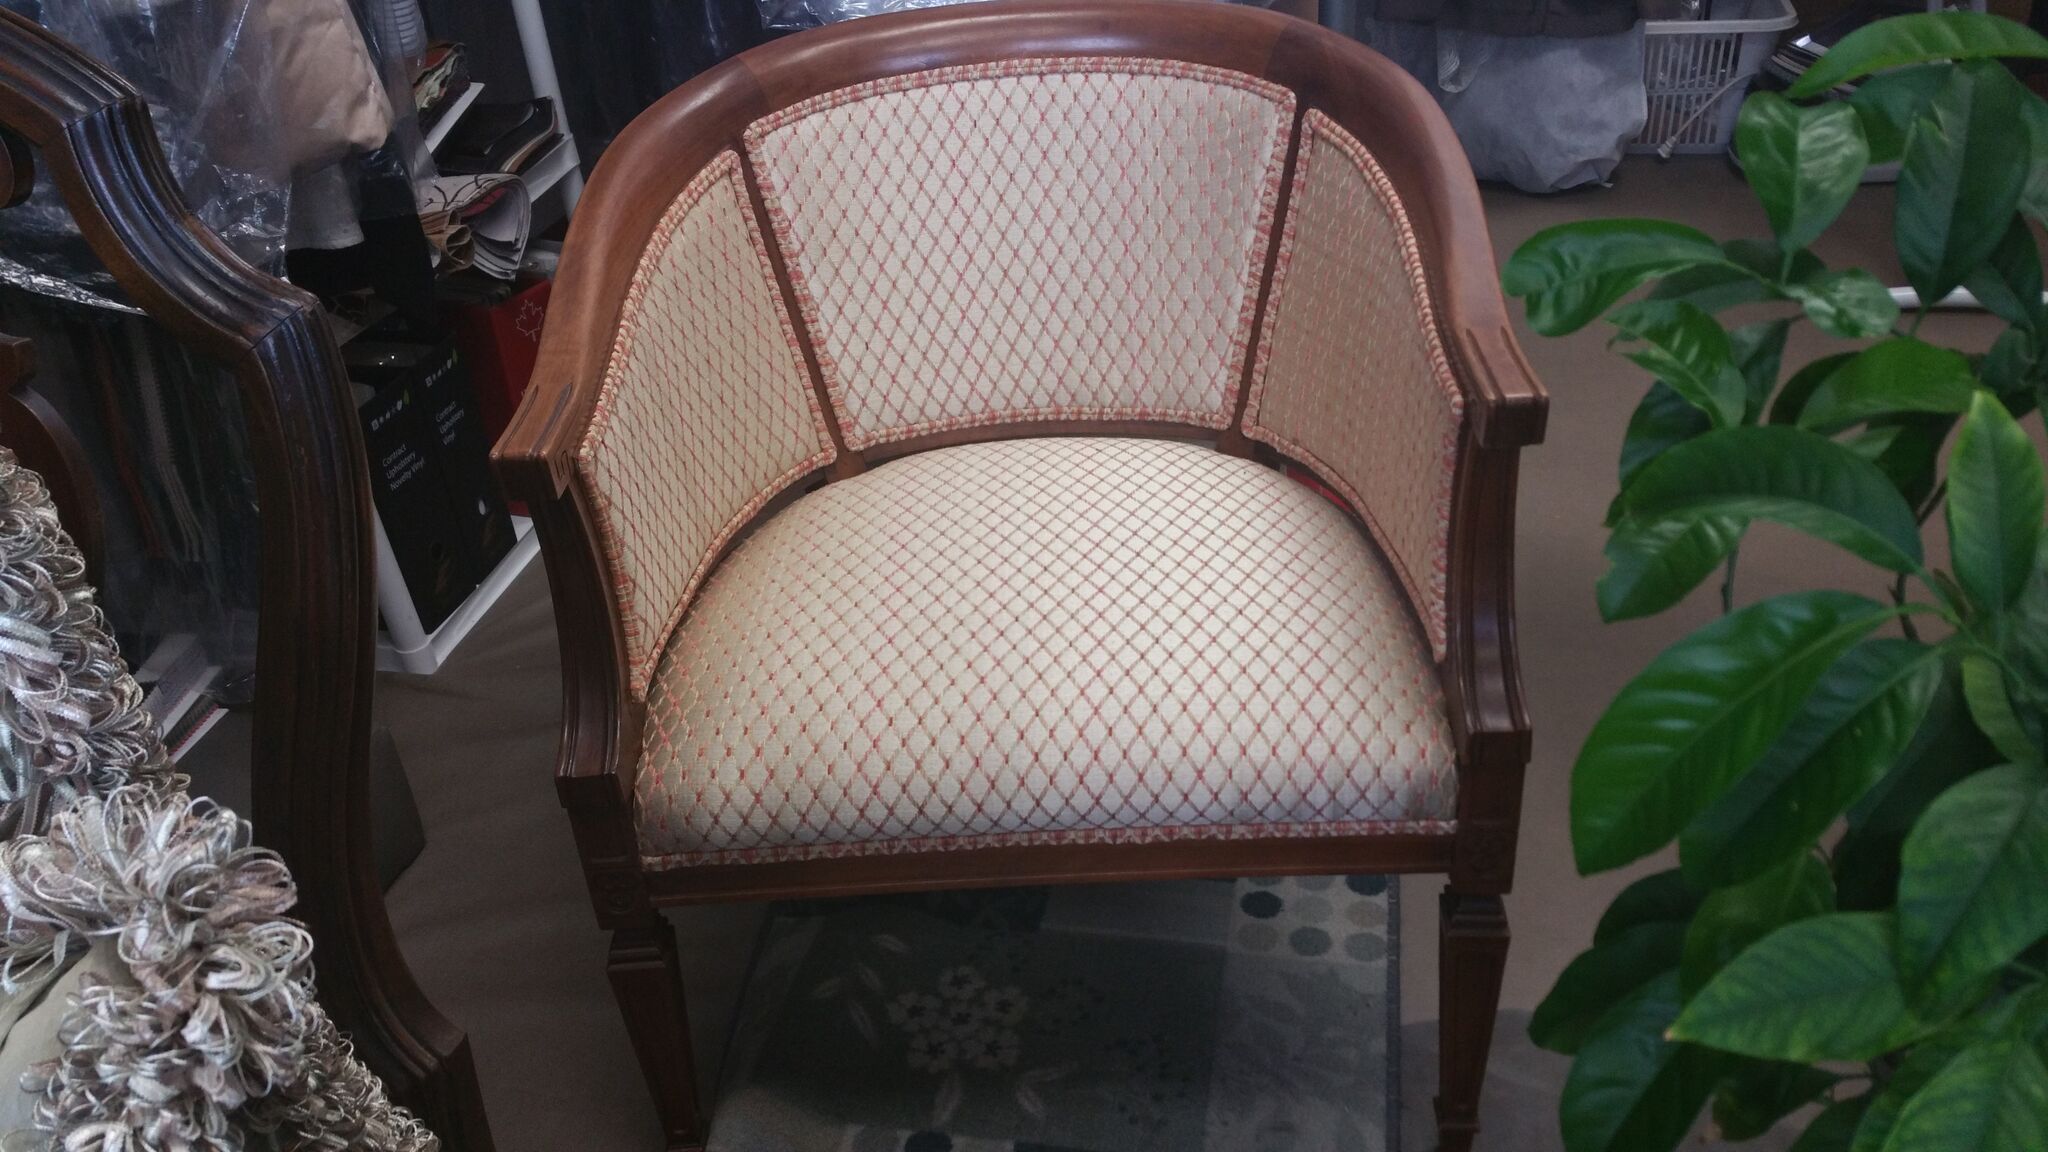 Re-covered chair by Ace Upholstery